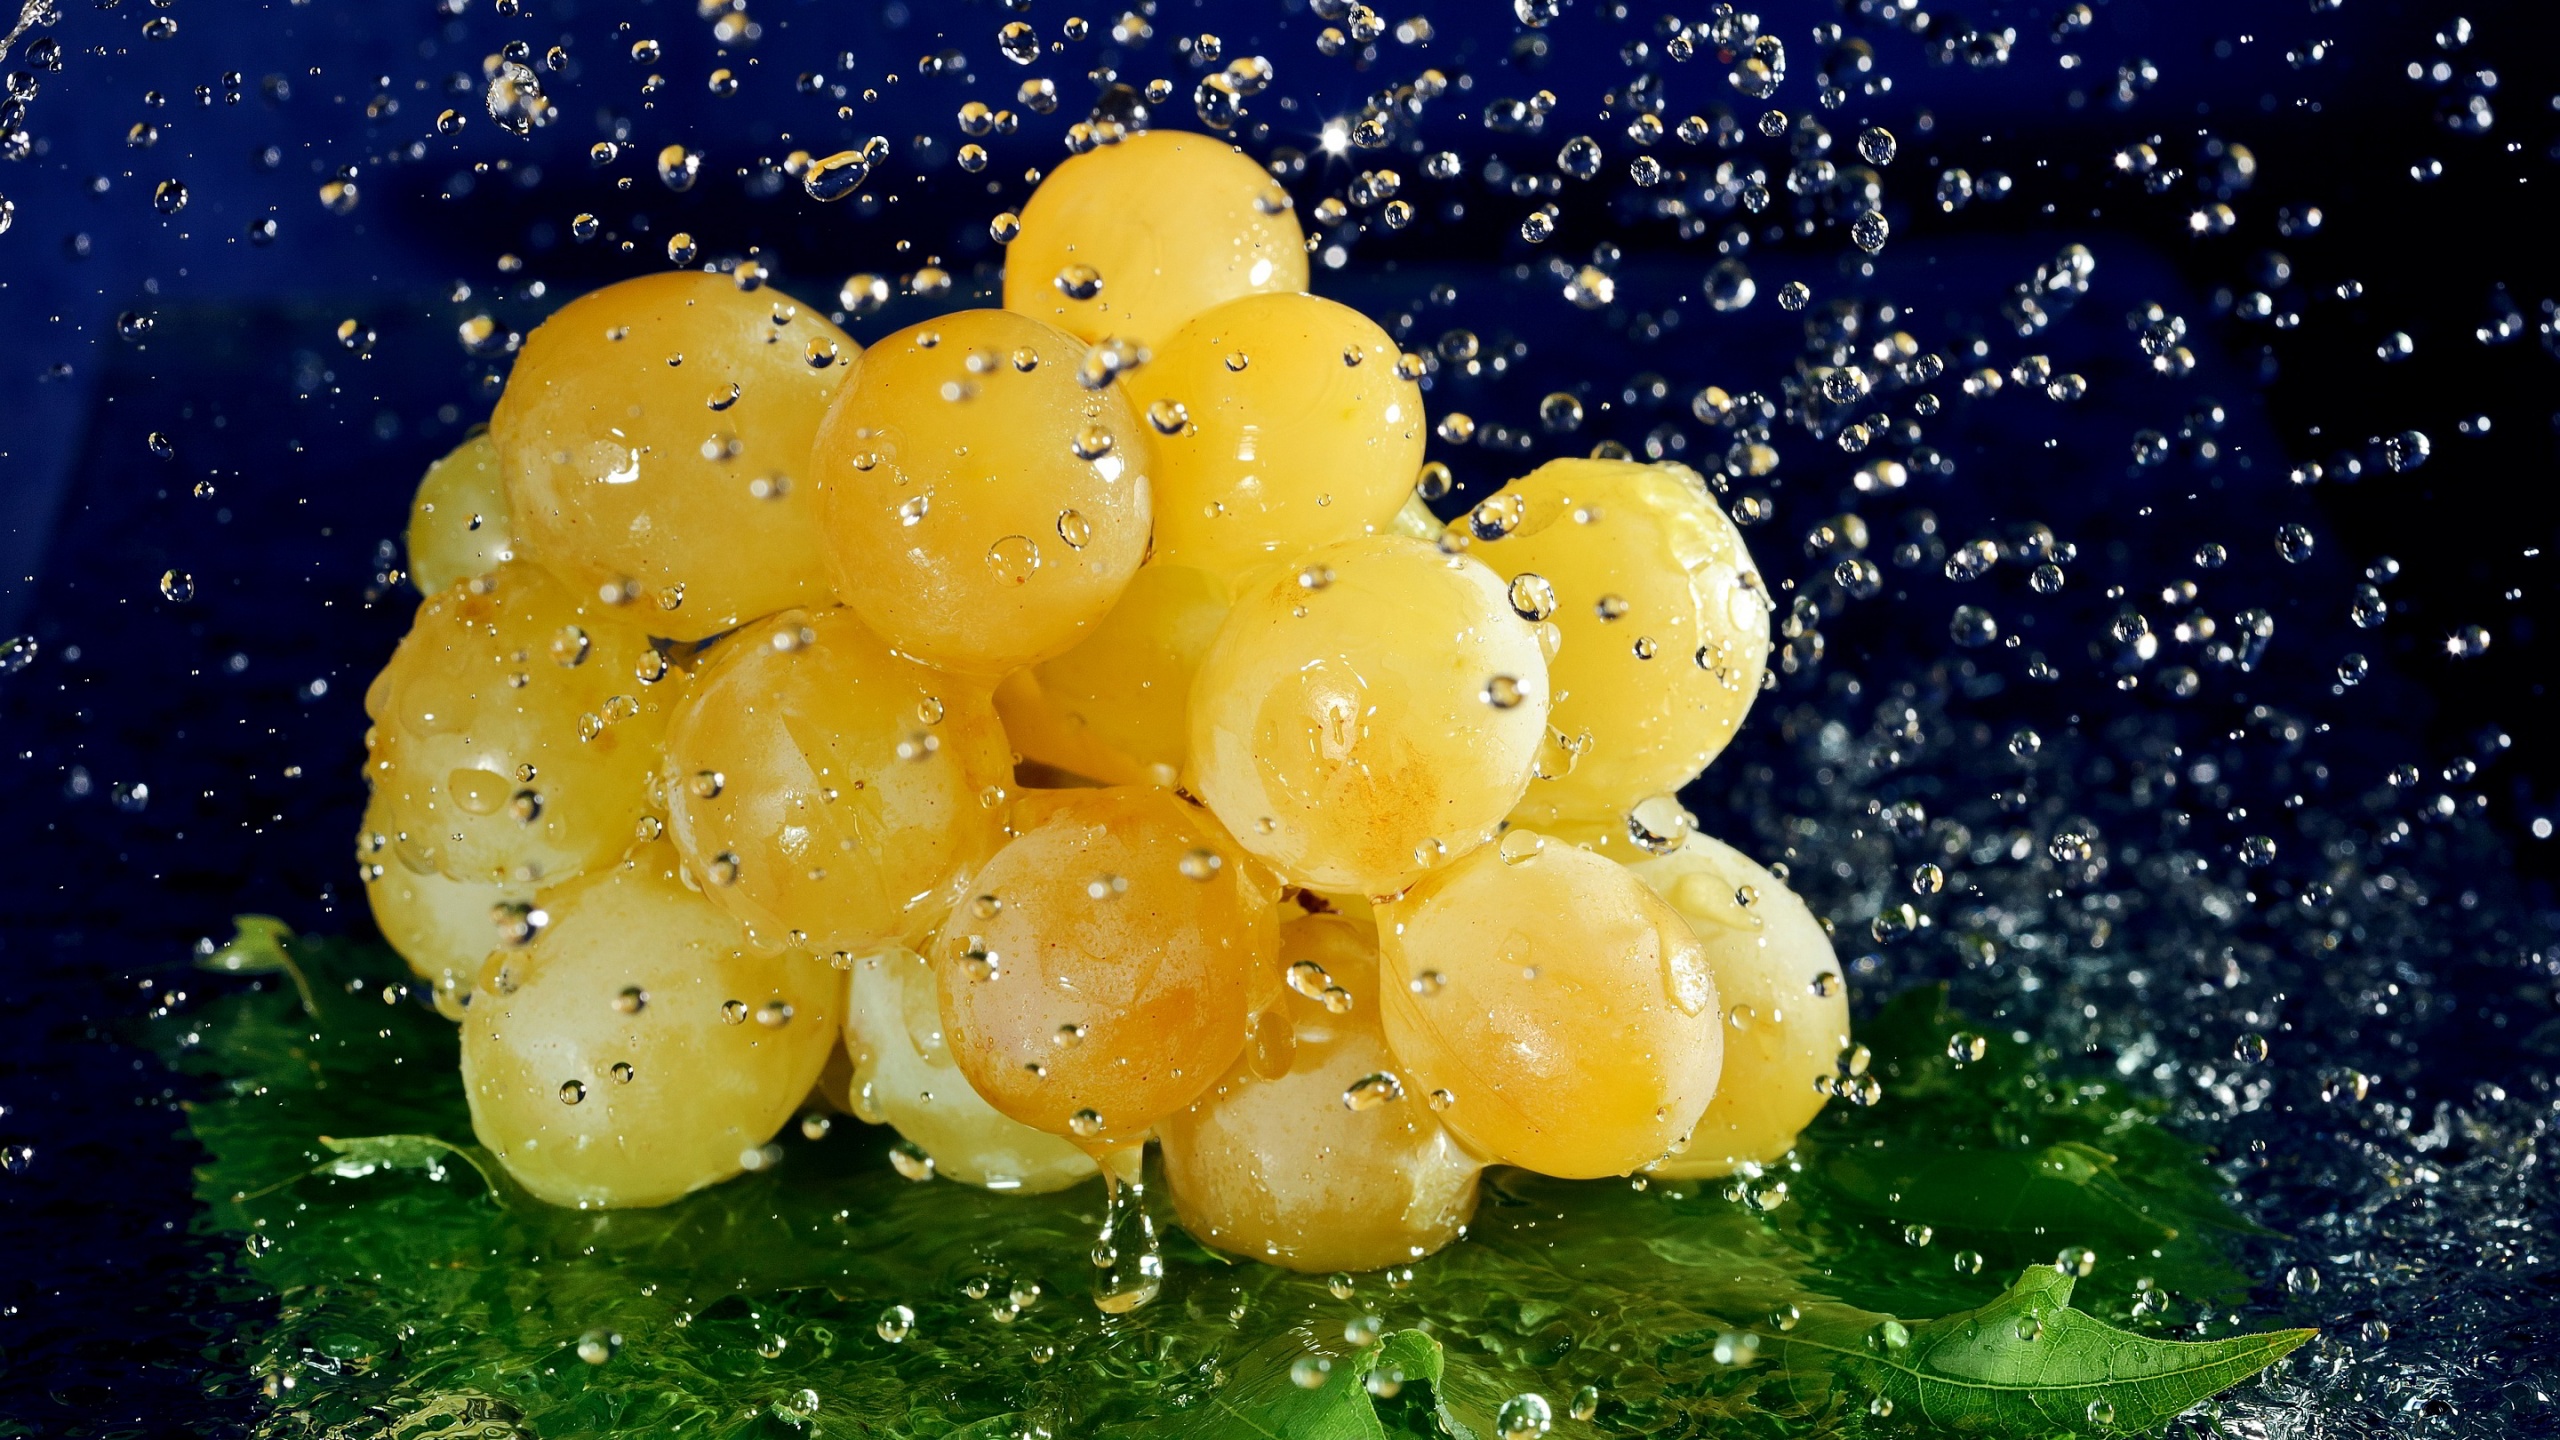 Description: The Wallpaper above is Grapes water drops Wallpaper in Resolution 2560x1440. Choose your Resolution and Download Grapes water drops Wallpaper